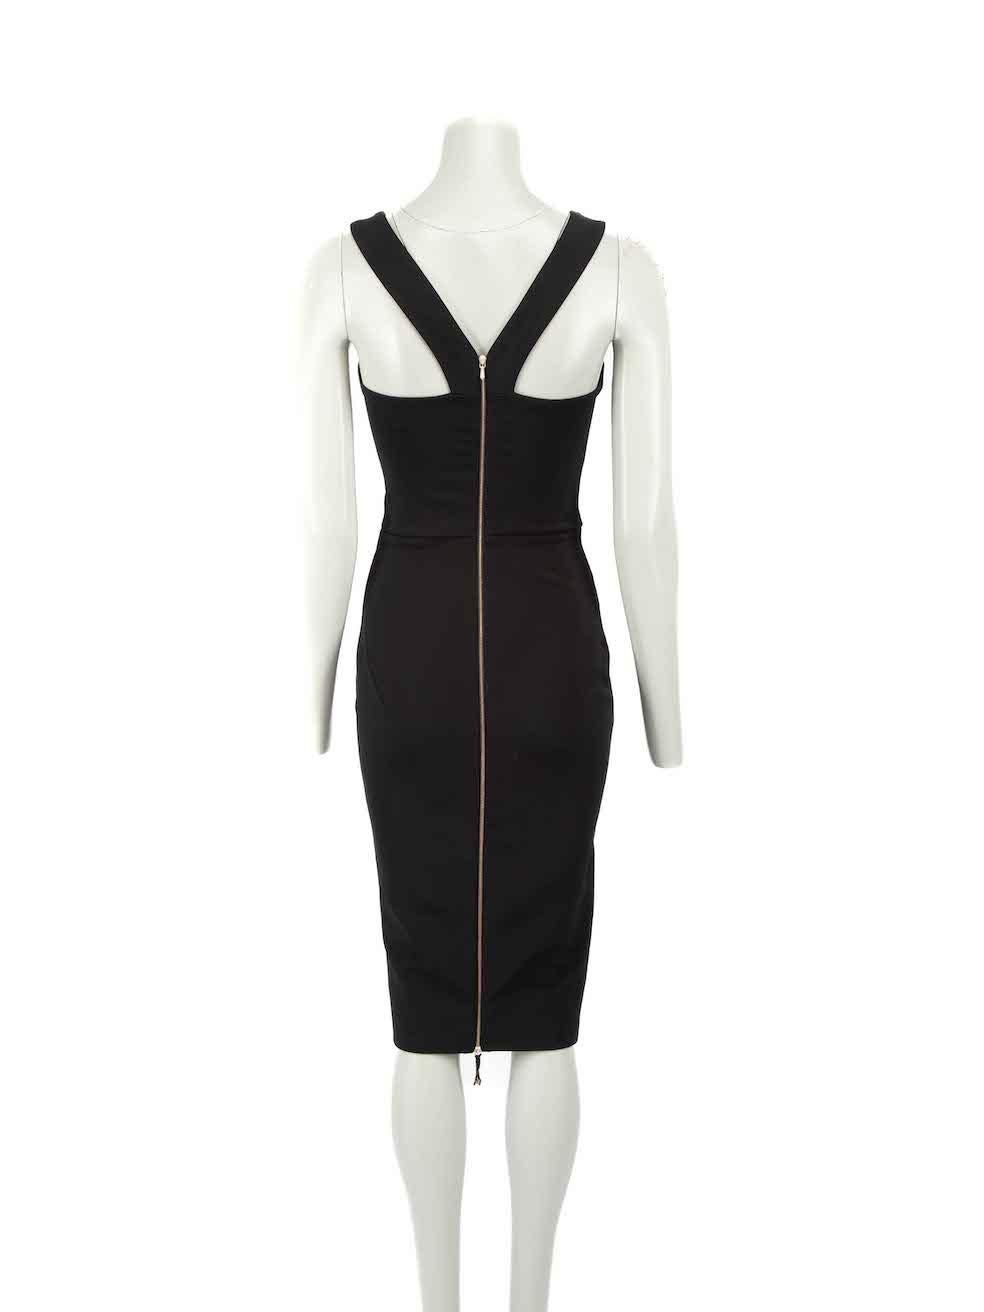 Victoria Beckham Black Knee Length Bodycon Dress Size S In Good Condition In London, GB